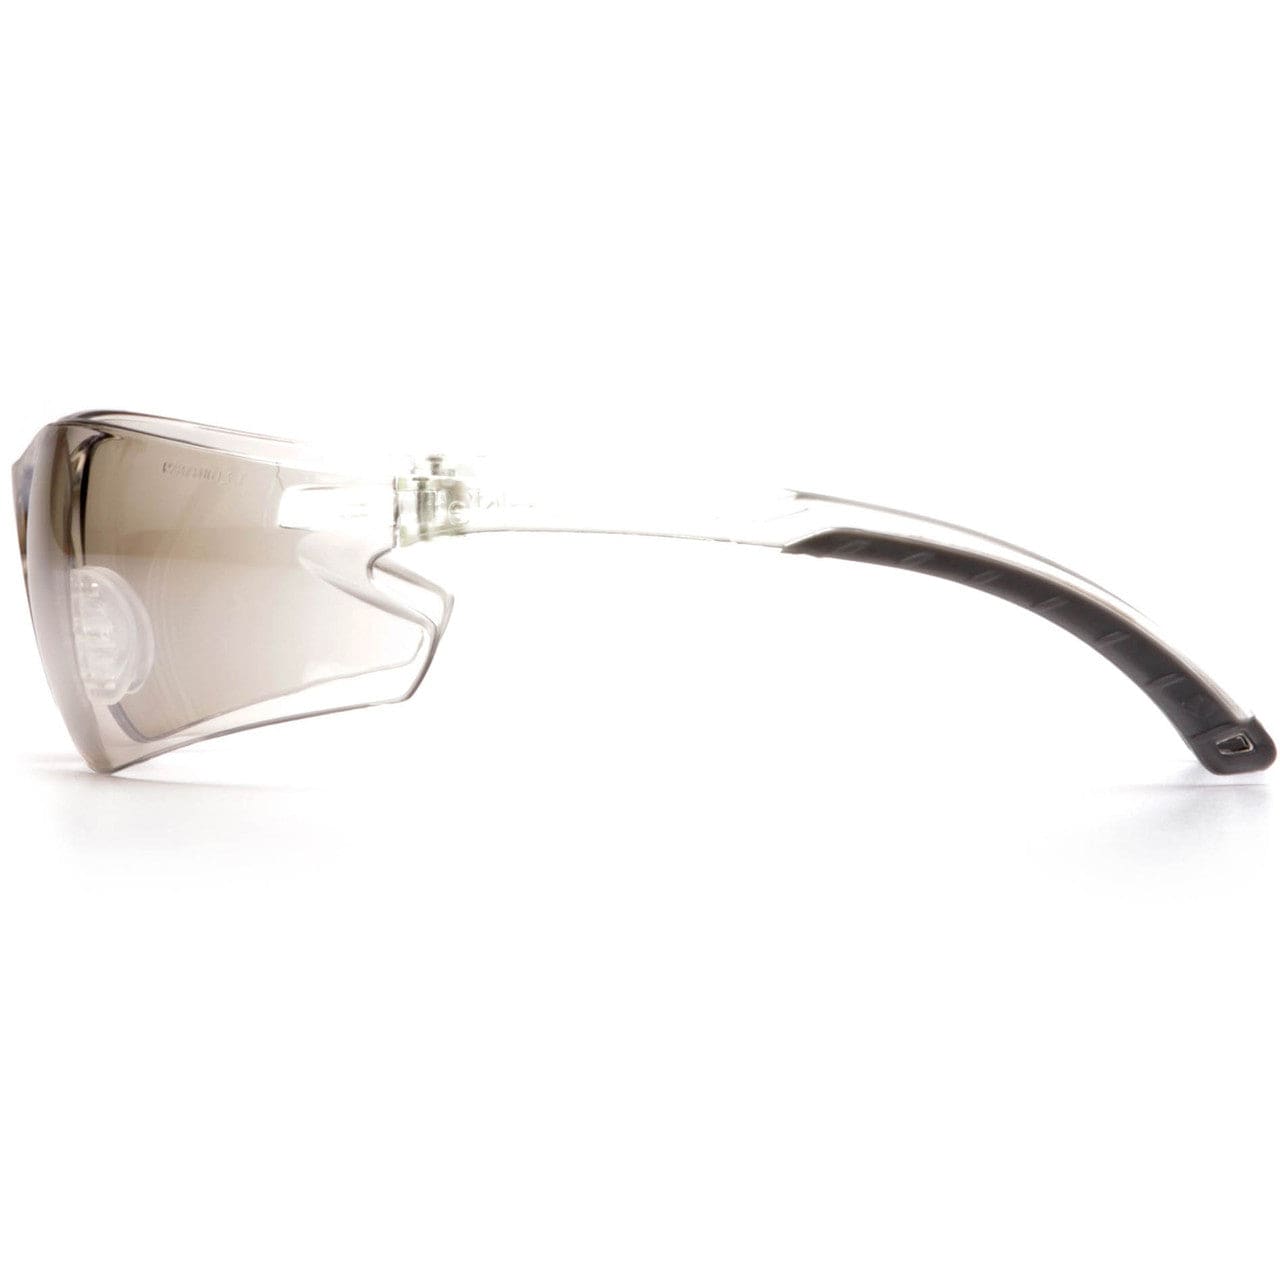 Pyramex Itek Safety Glasses with Indoor/Outdoor Lens S5880S Side View